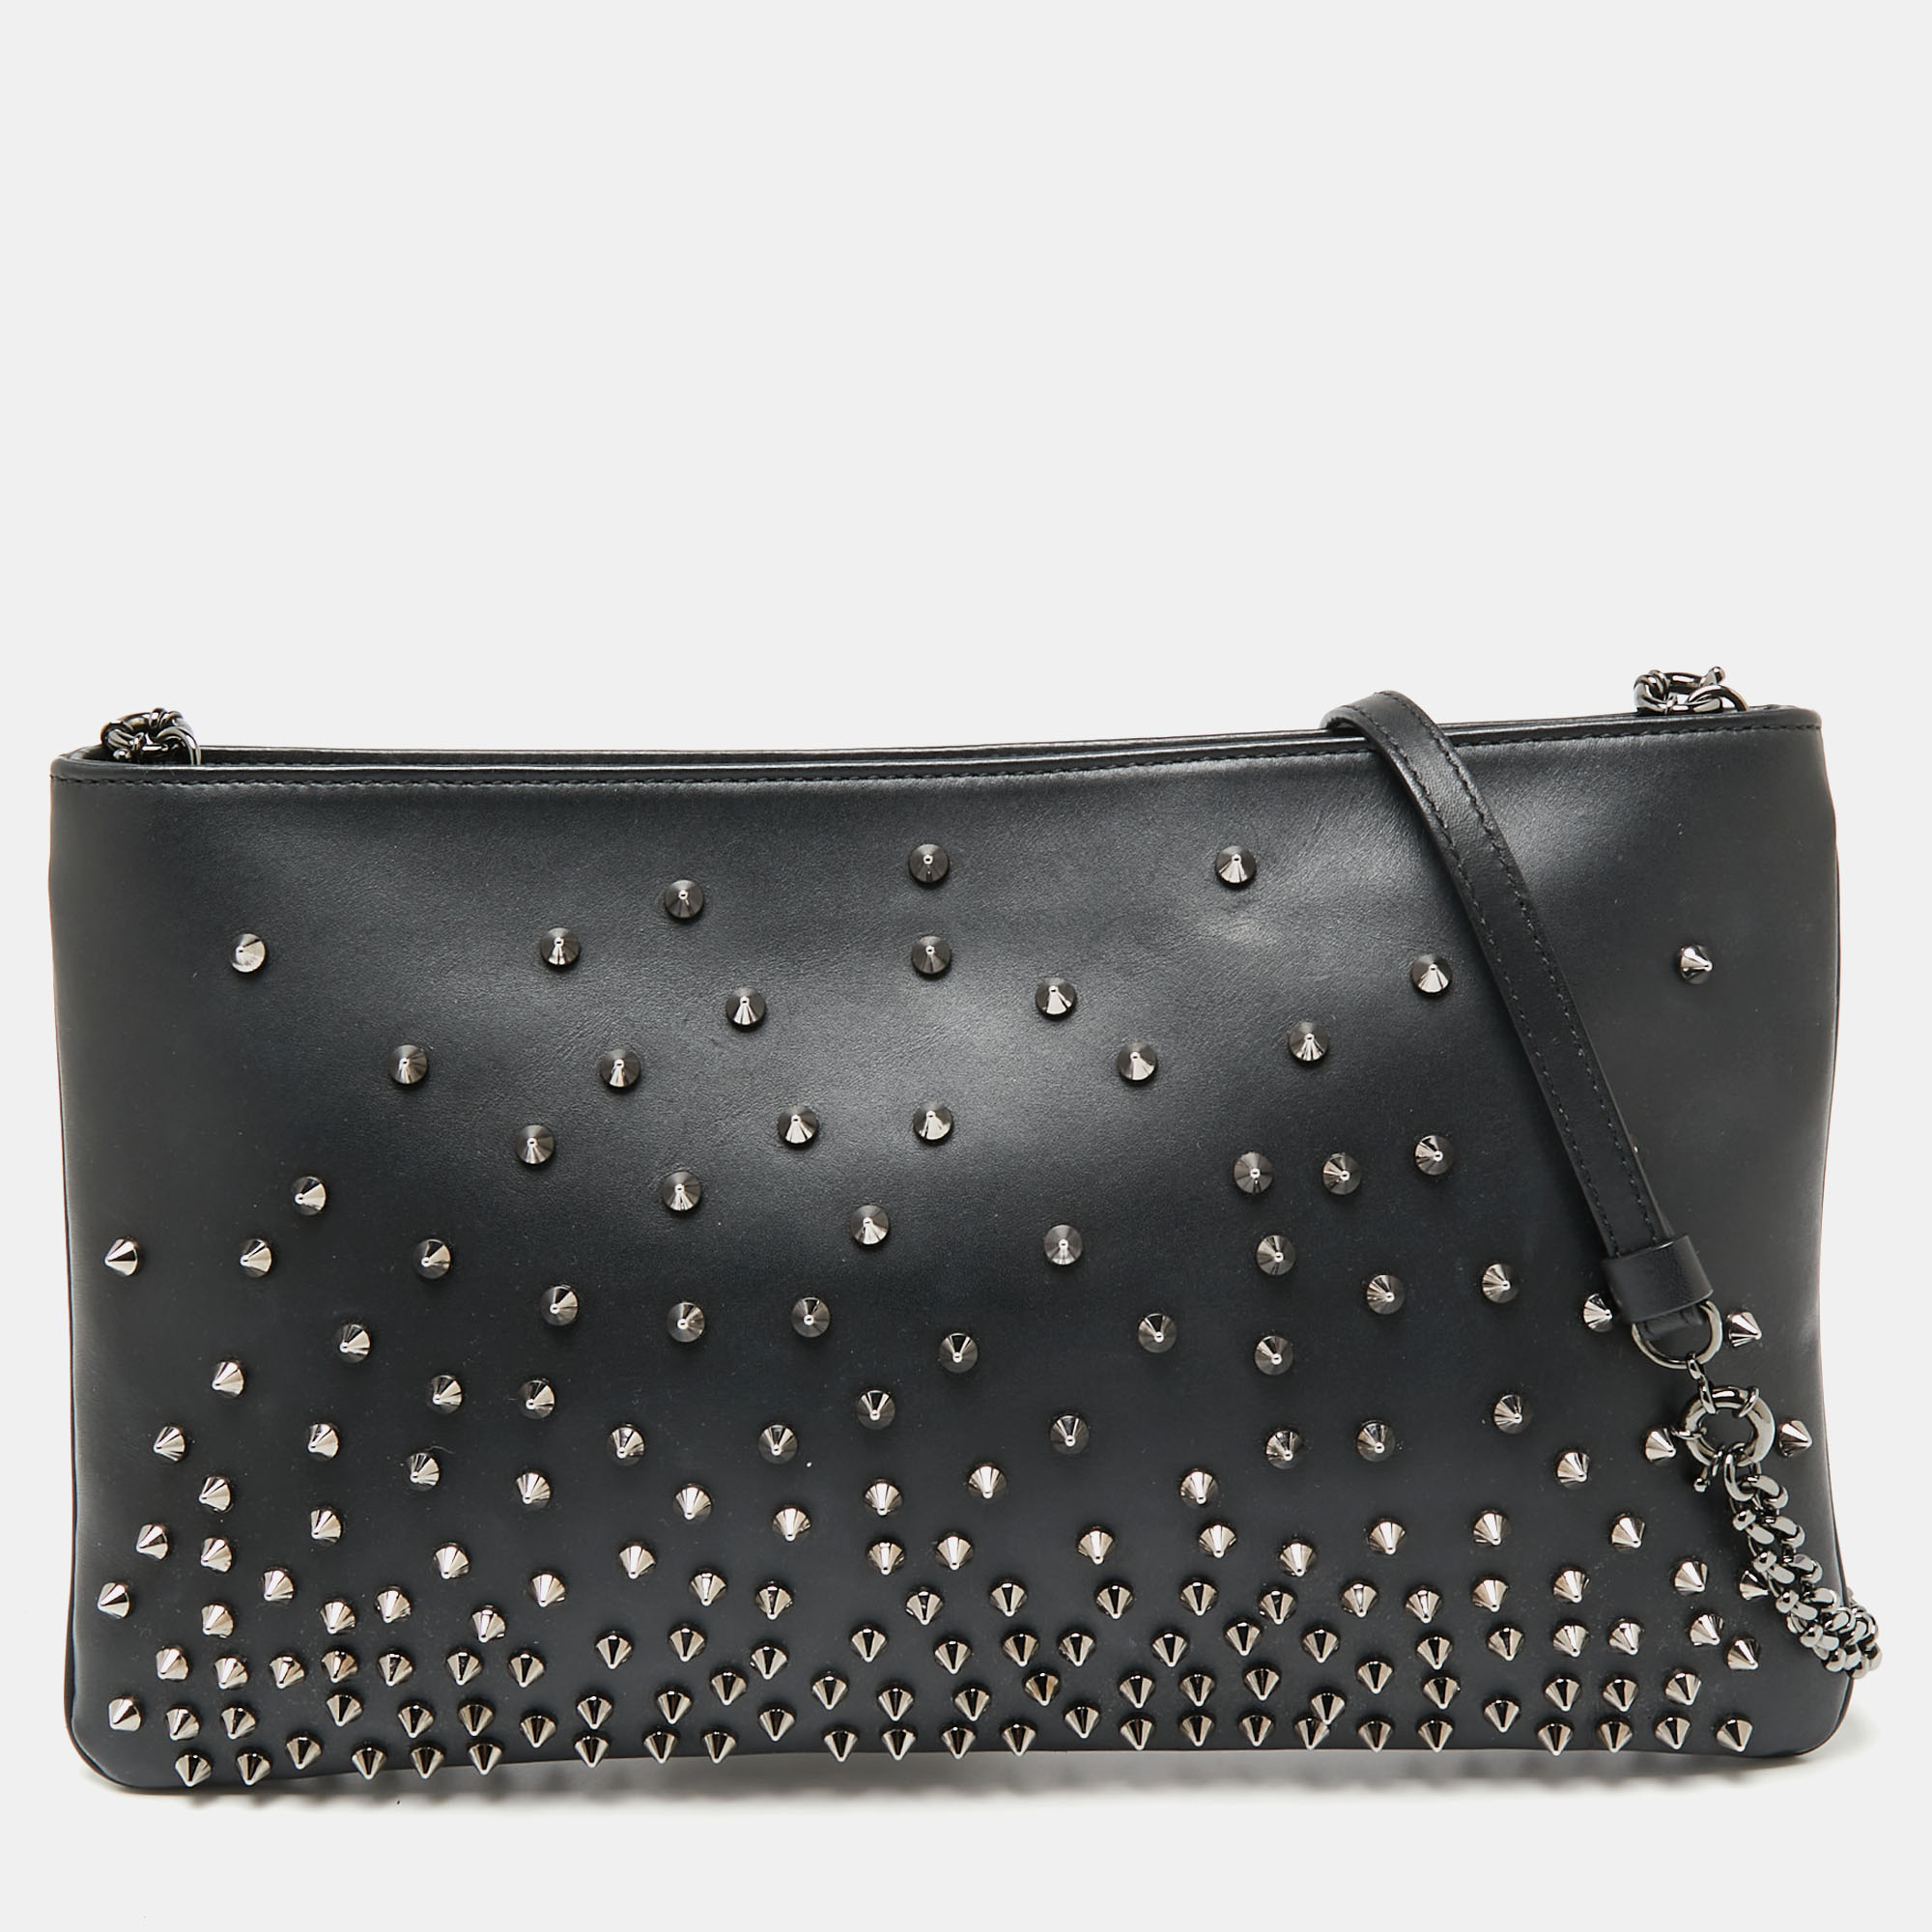 Pre-owned Christian Louboutin Black Leather Spiked Loubiposh Chain Clutch